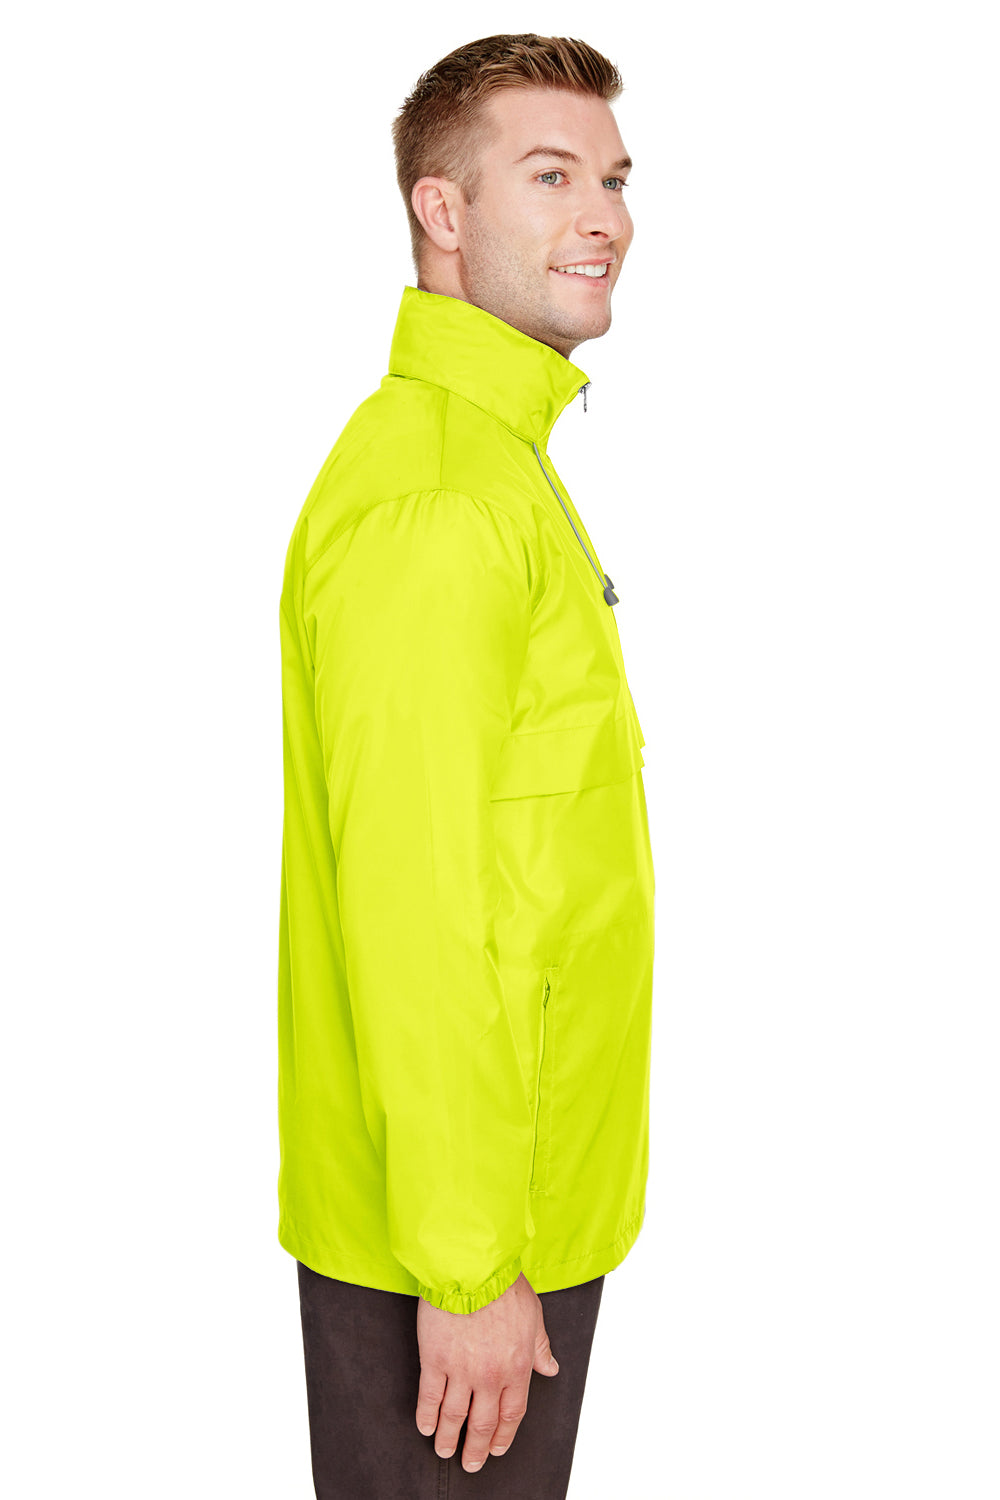 Team 365 TT73 Mens Zone Protect Water Resistant Full Zip Hooded Jacket Safety Yellow Side